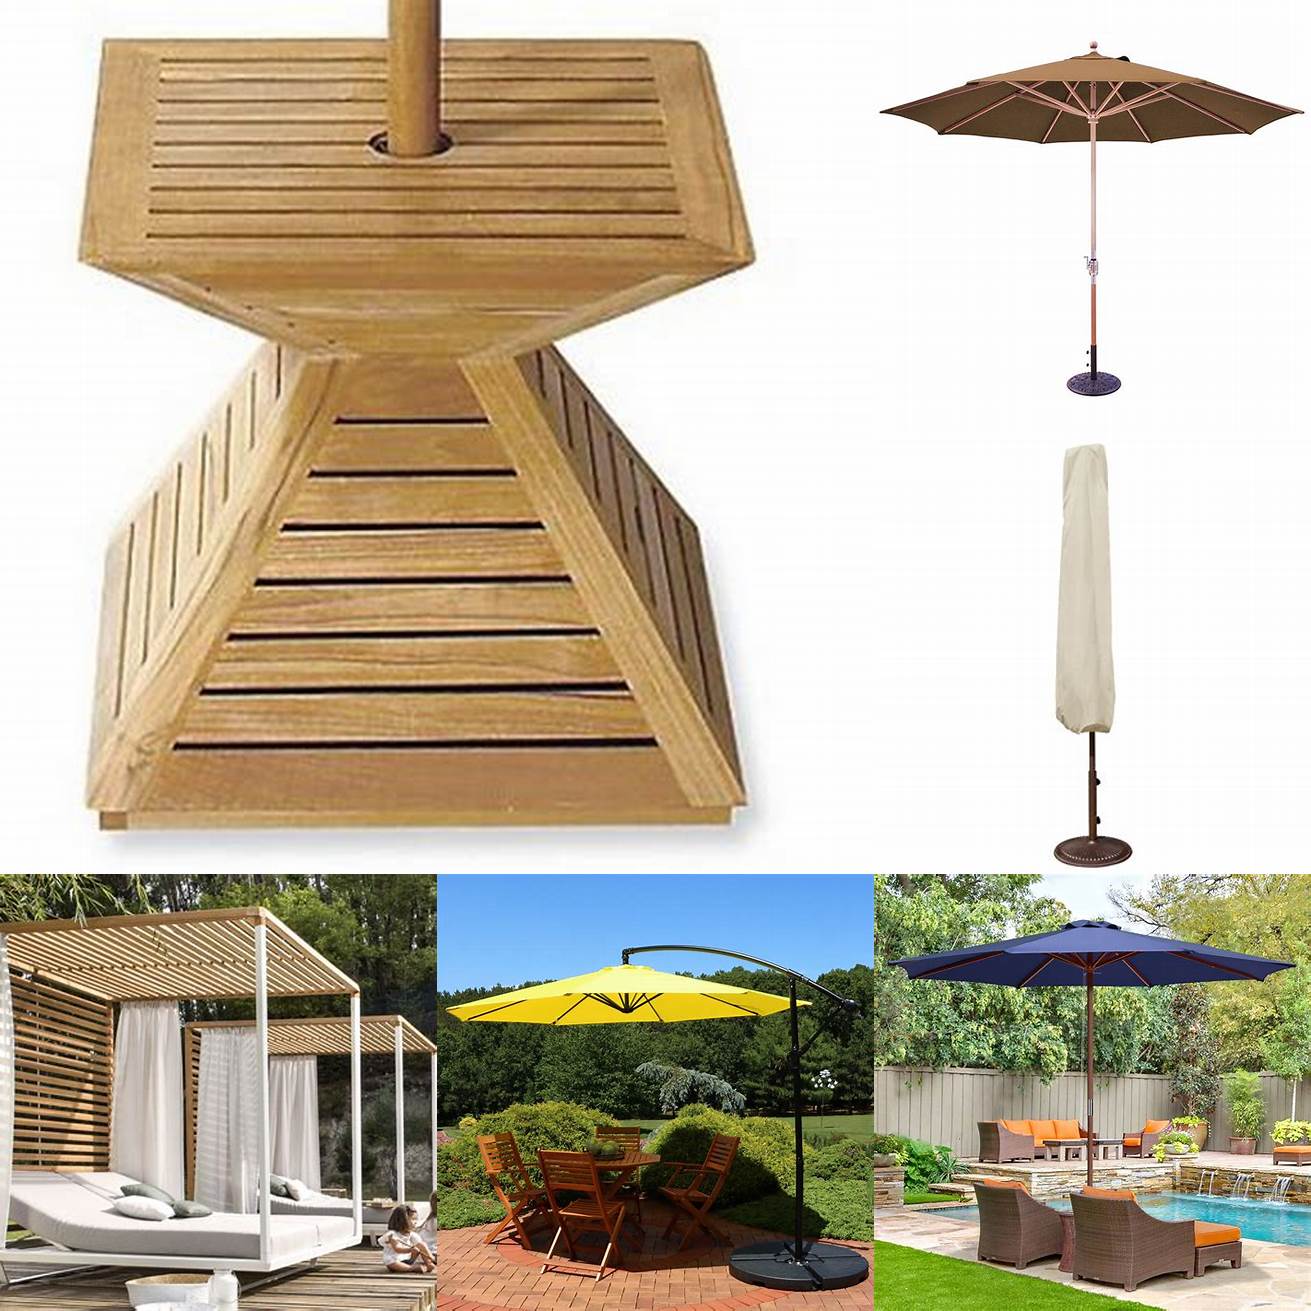 Outdoor Teak Furniture Covered with an Umbrella Cover